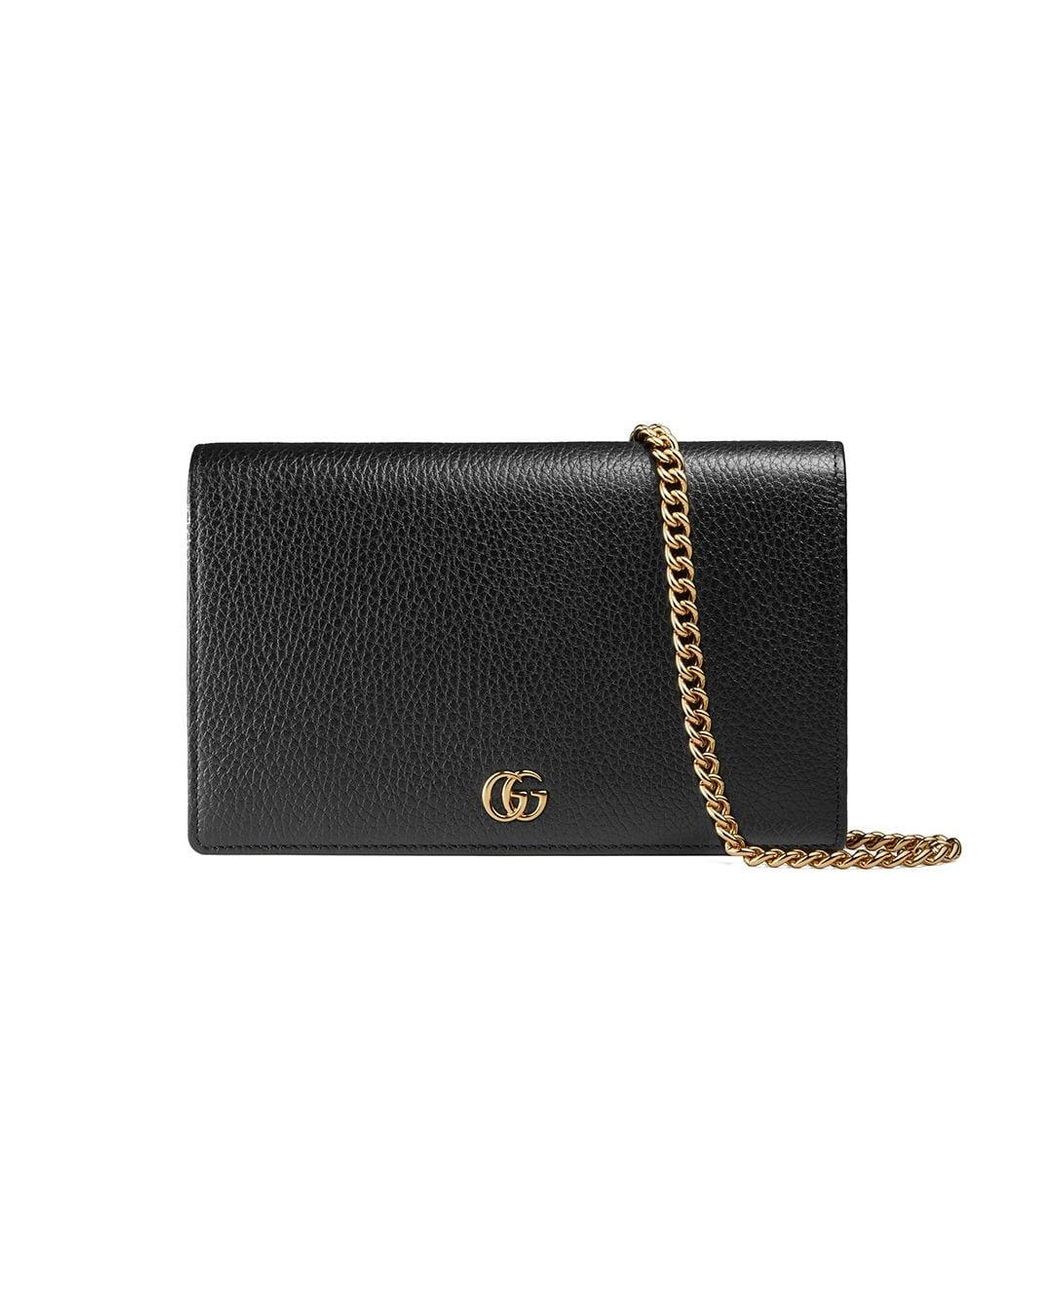 gg marmont leather mini chain bag pink